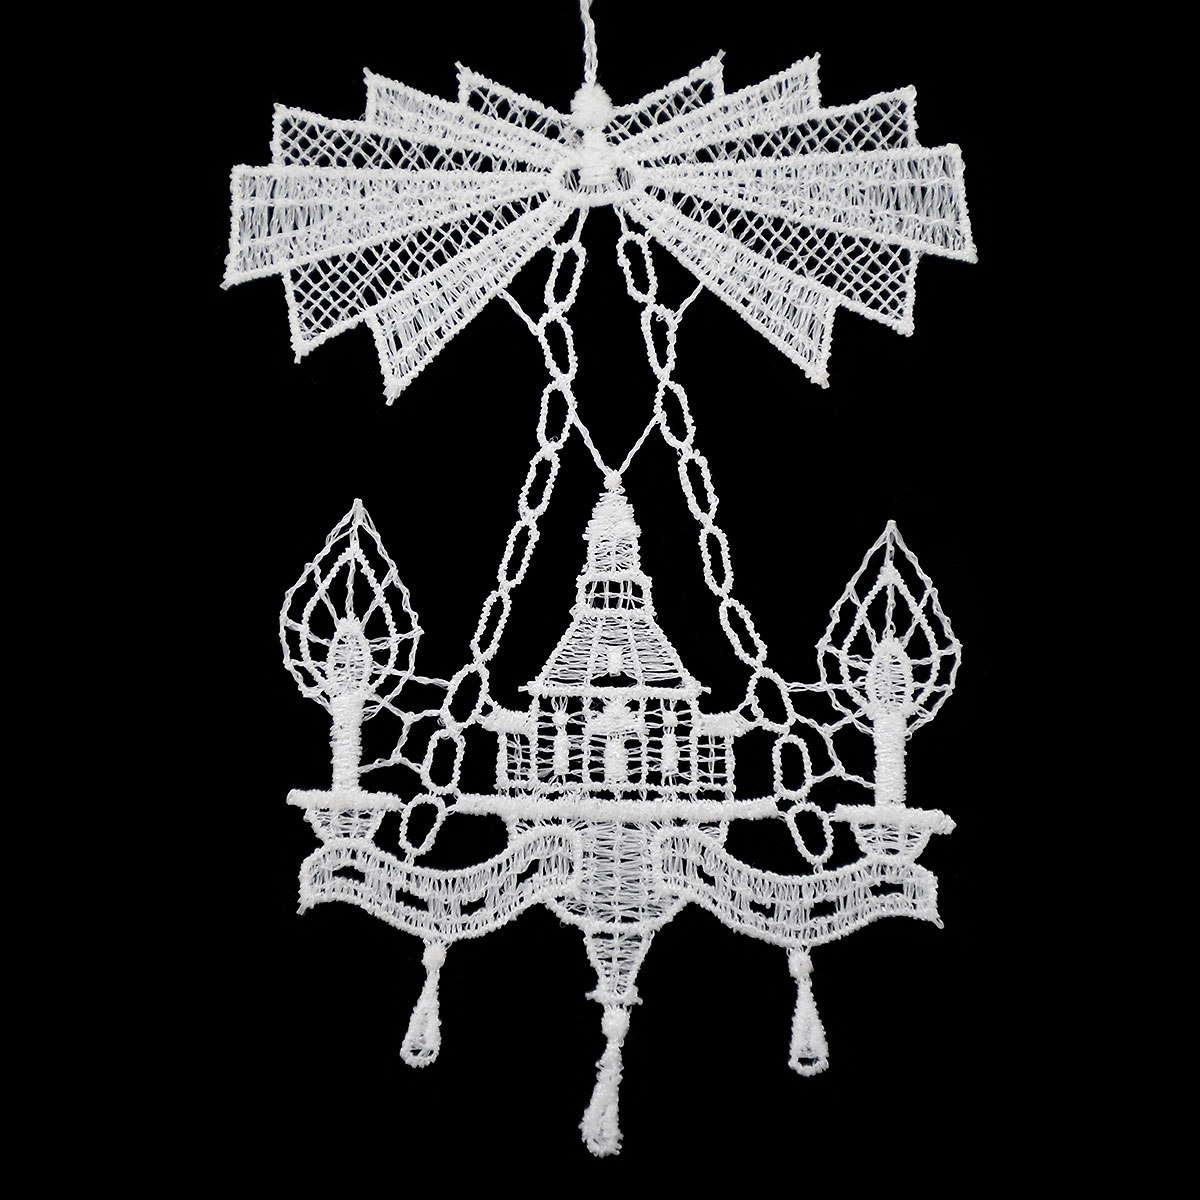 Stitched Lace Candelabra Pyramid Ornament